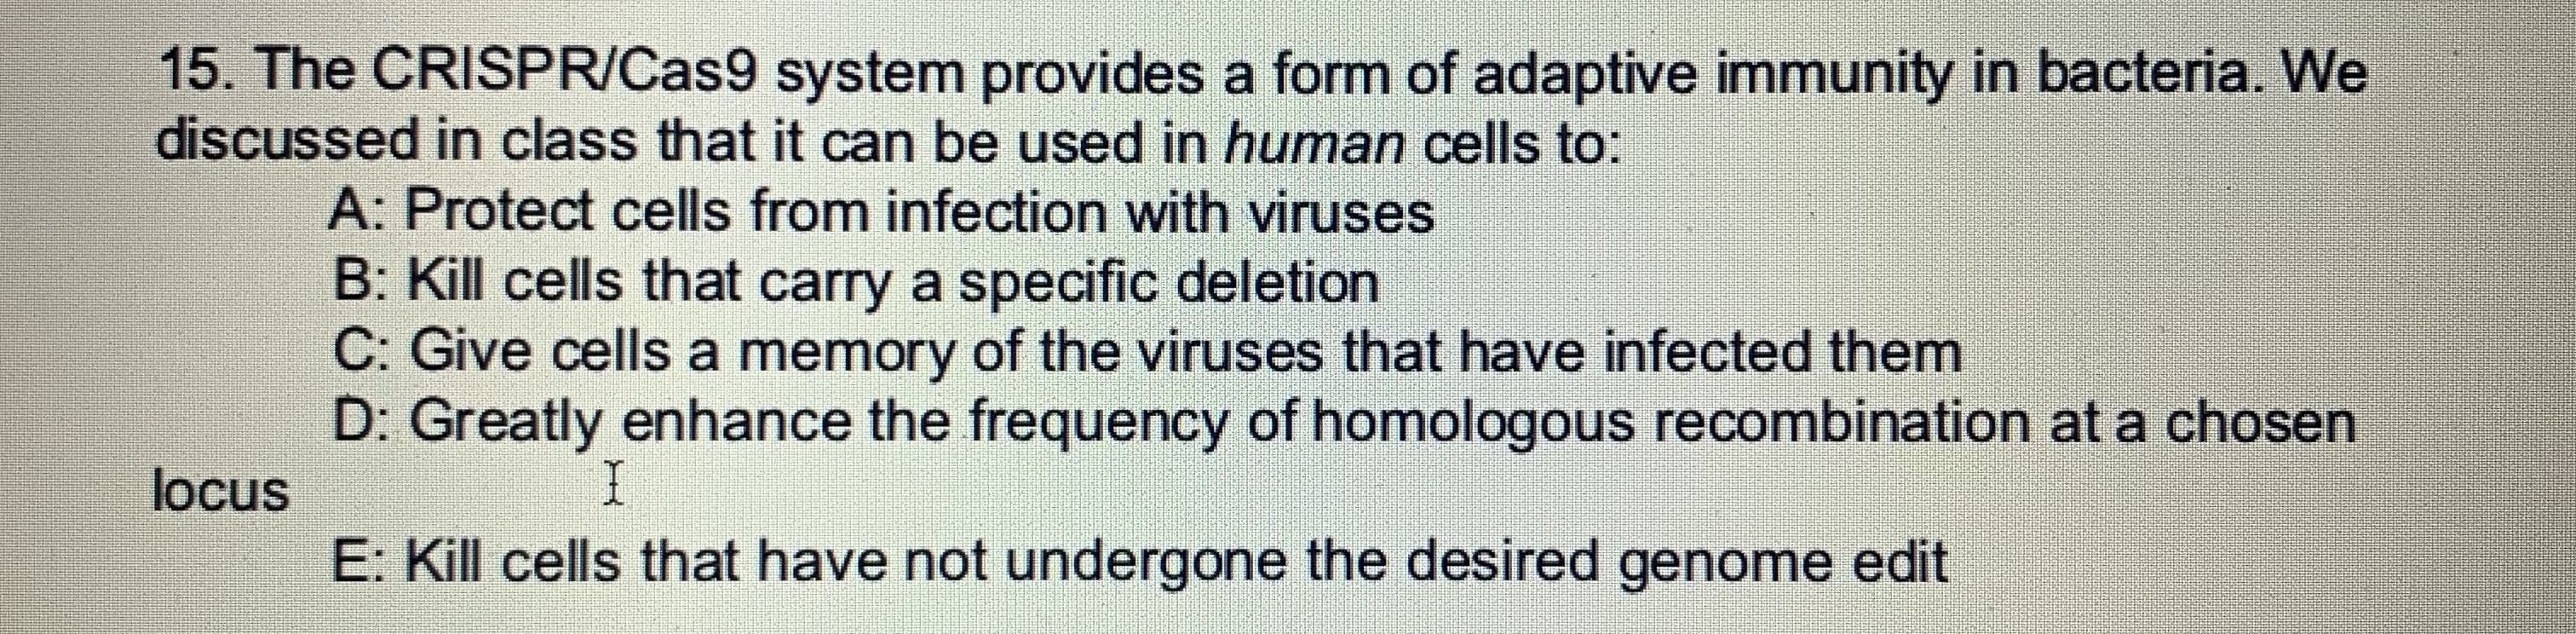 15. The CRISPR/Cas9 system provides a form of adaptive immunity in bacteria. We
discussed in class that it can be used in human cells to:
A: Protect cells from infection with viruses
B: Kill cells that carry a specific deletion
C: Give cells a memory of the viruses that have infected them
D: Greatly enhance the frequency of homologous recombination at a chosen
I
locus
E: Kill cells that have not undergone the desired genome edit
